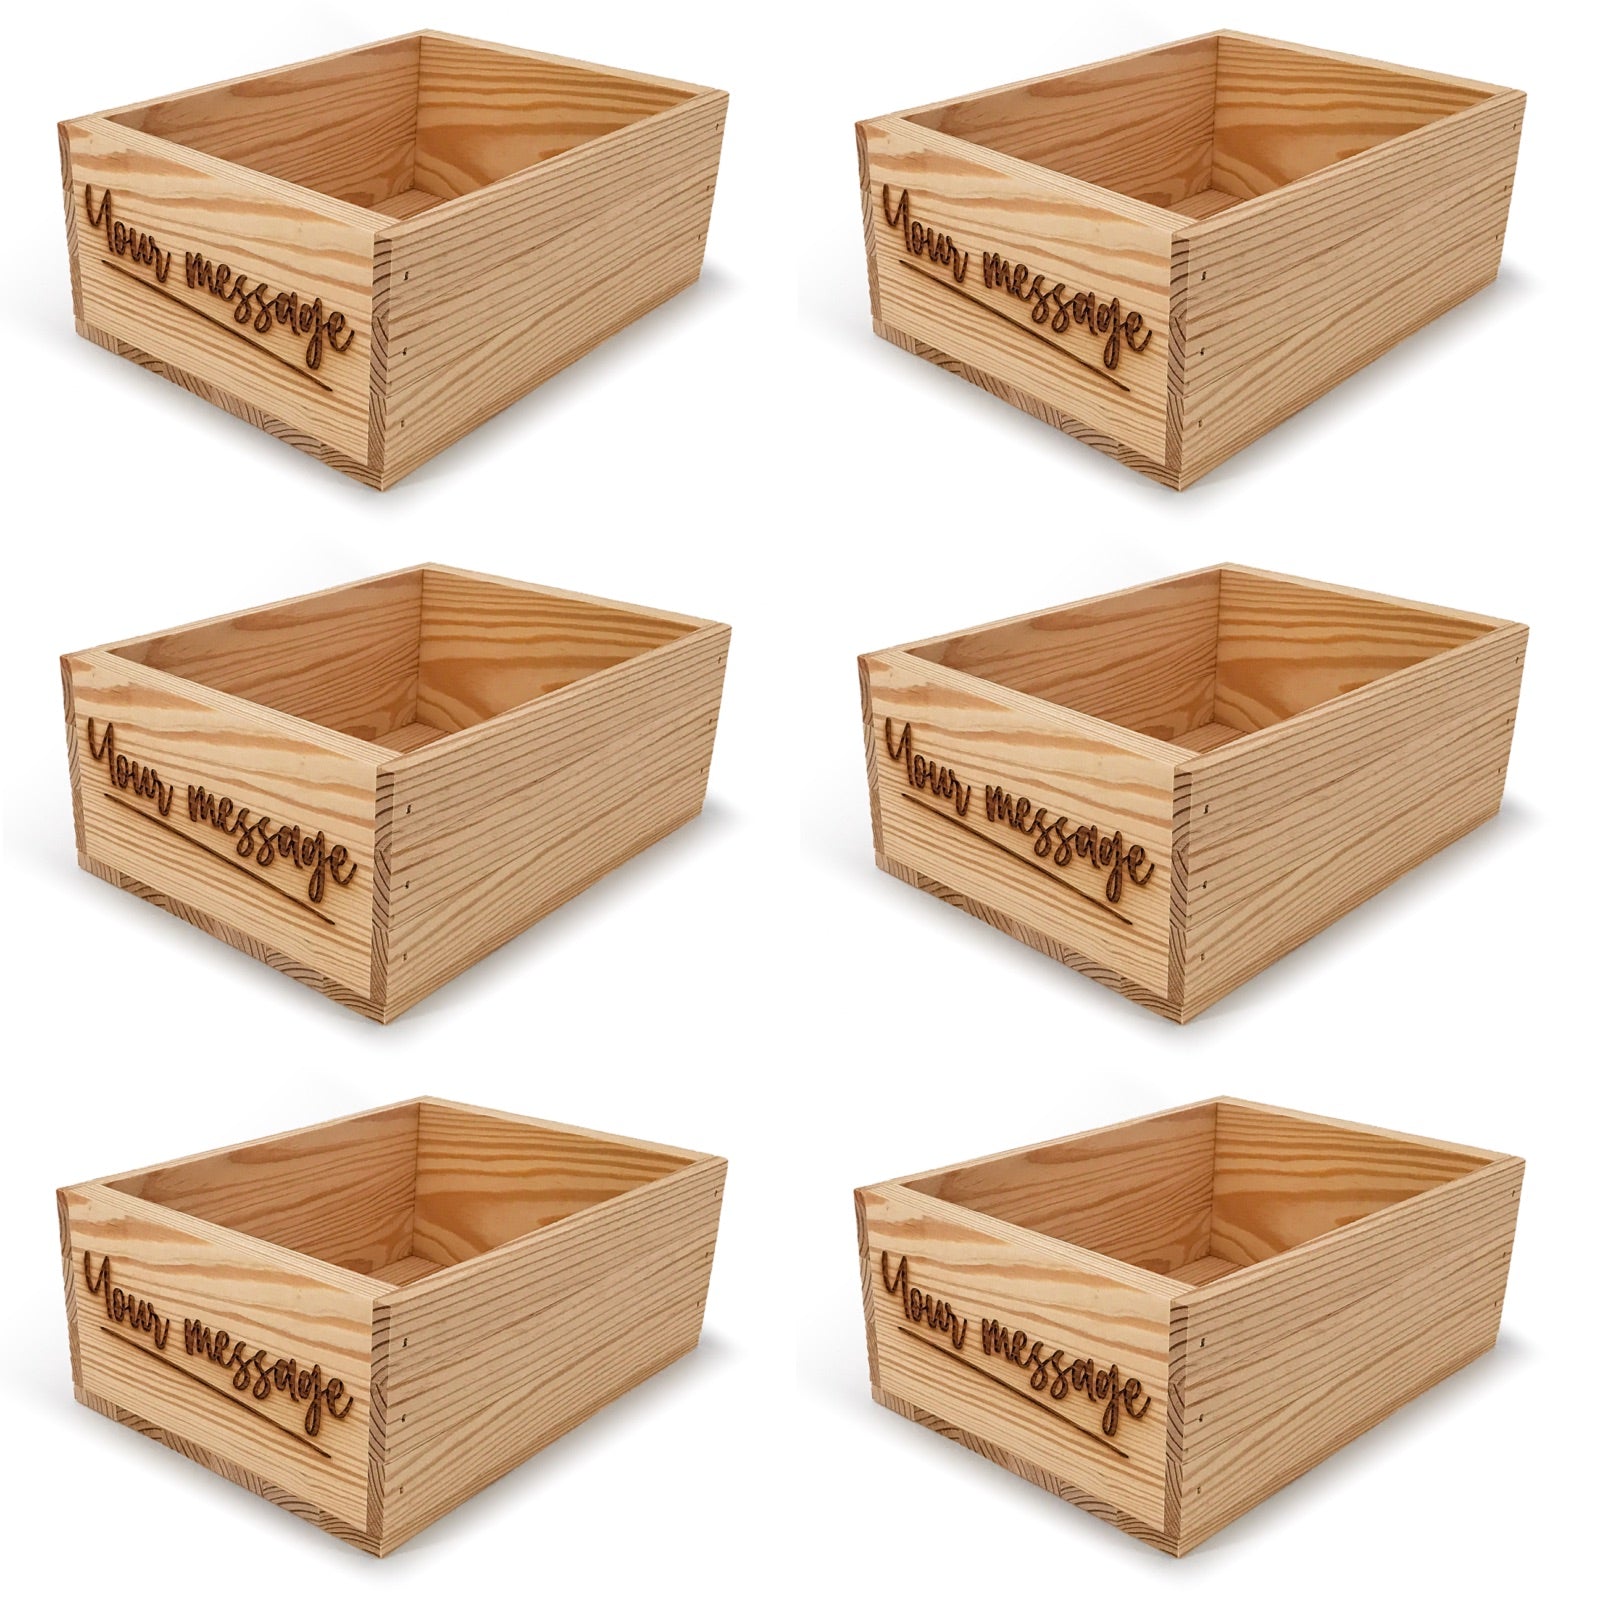 6 Small wooden crates with custom message 10x8x4.25